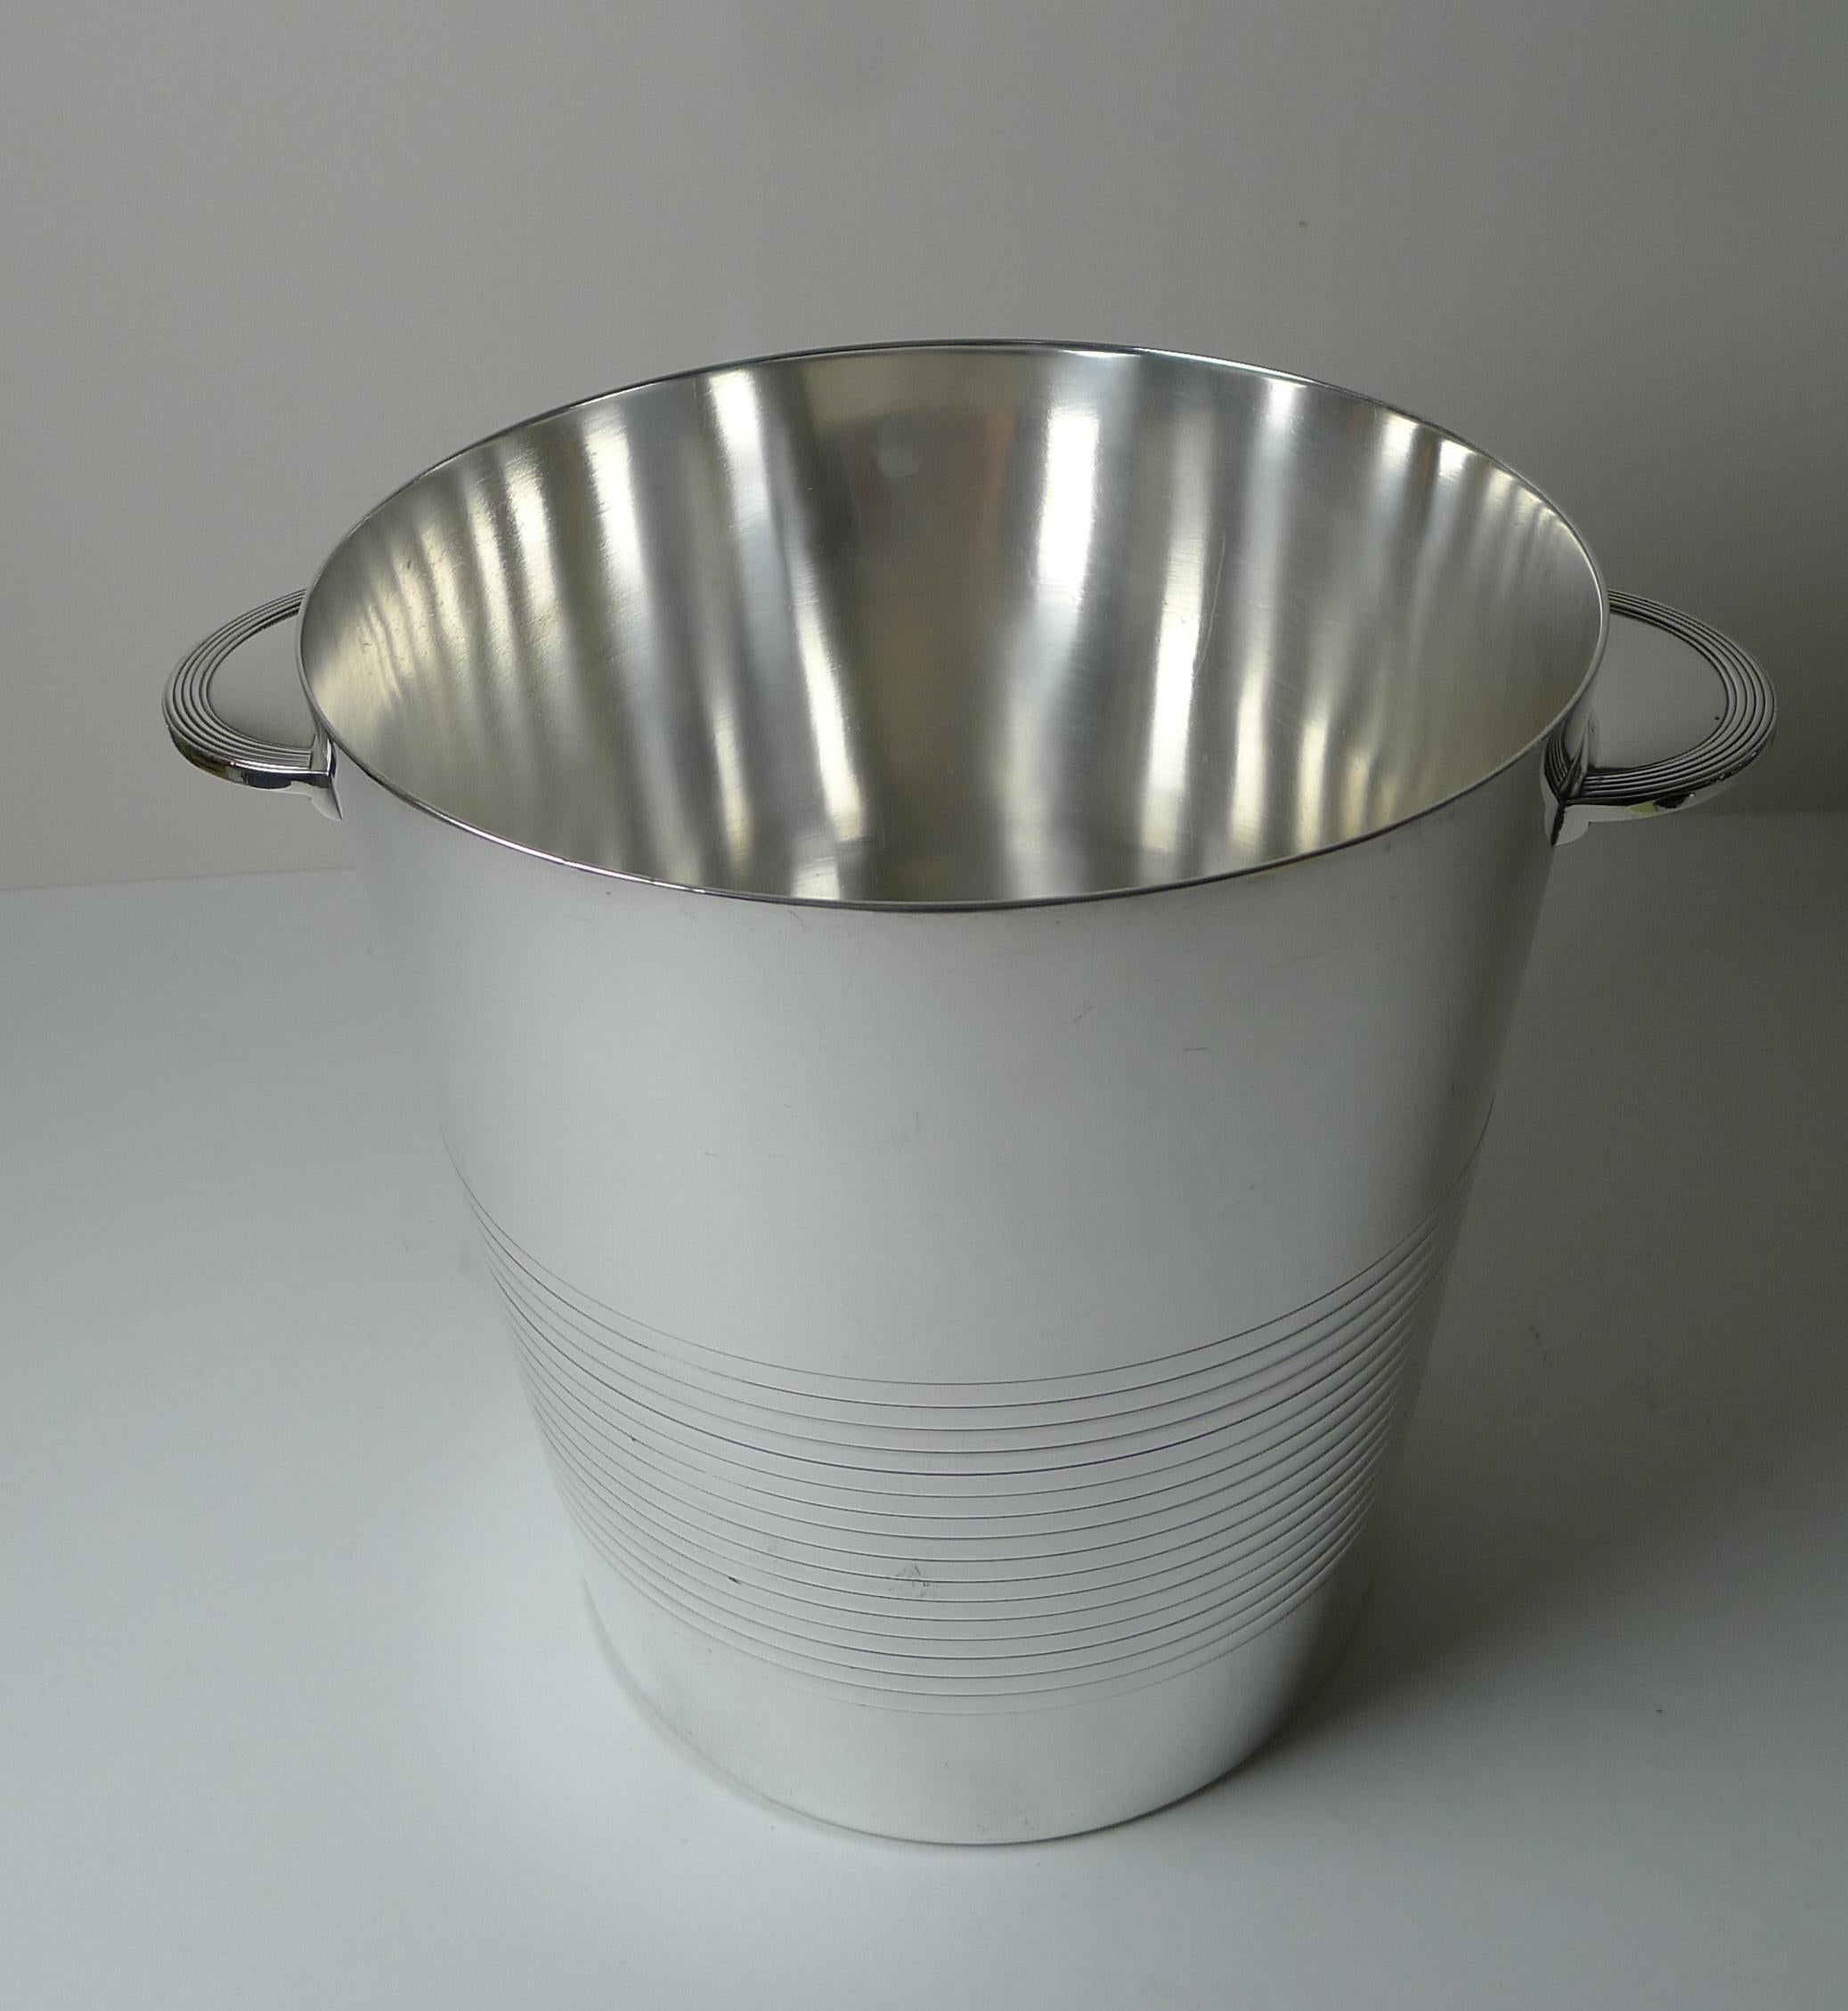 A handsome and highly sought-after Champagne bucket designed by Luc Lanel for Chrsitofle, Paris.

This 